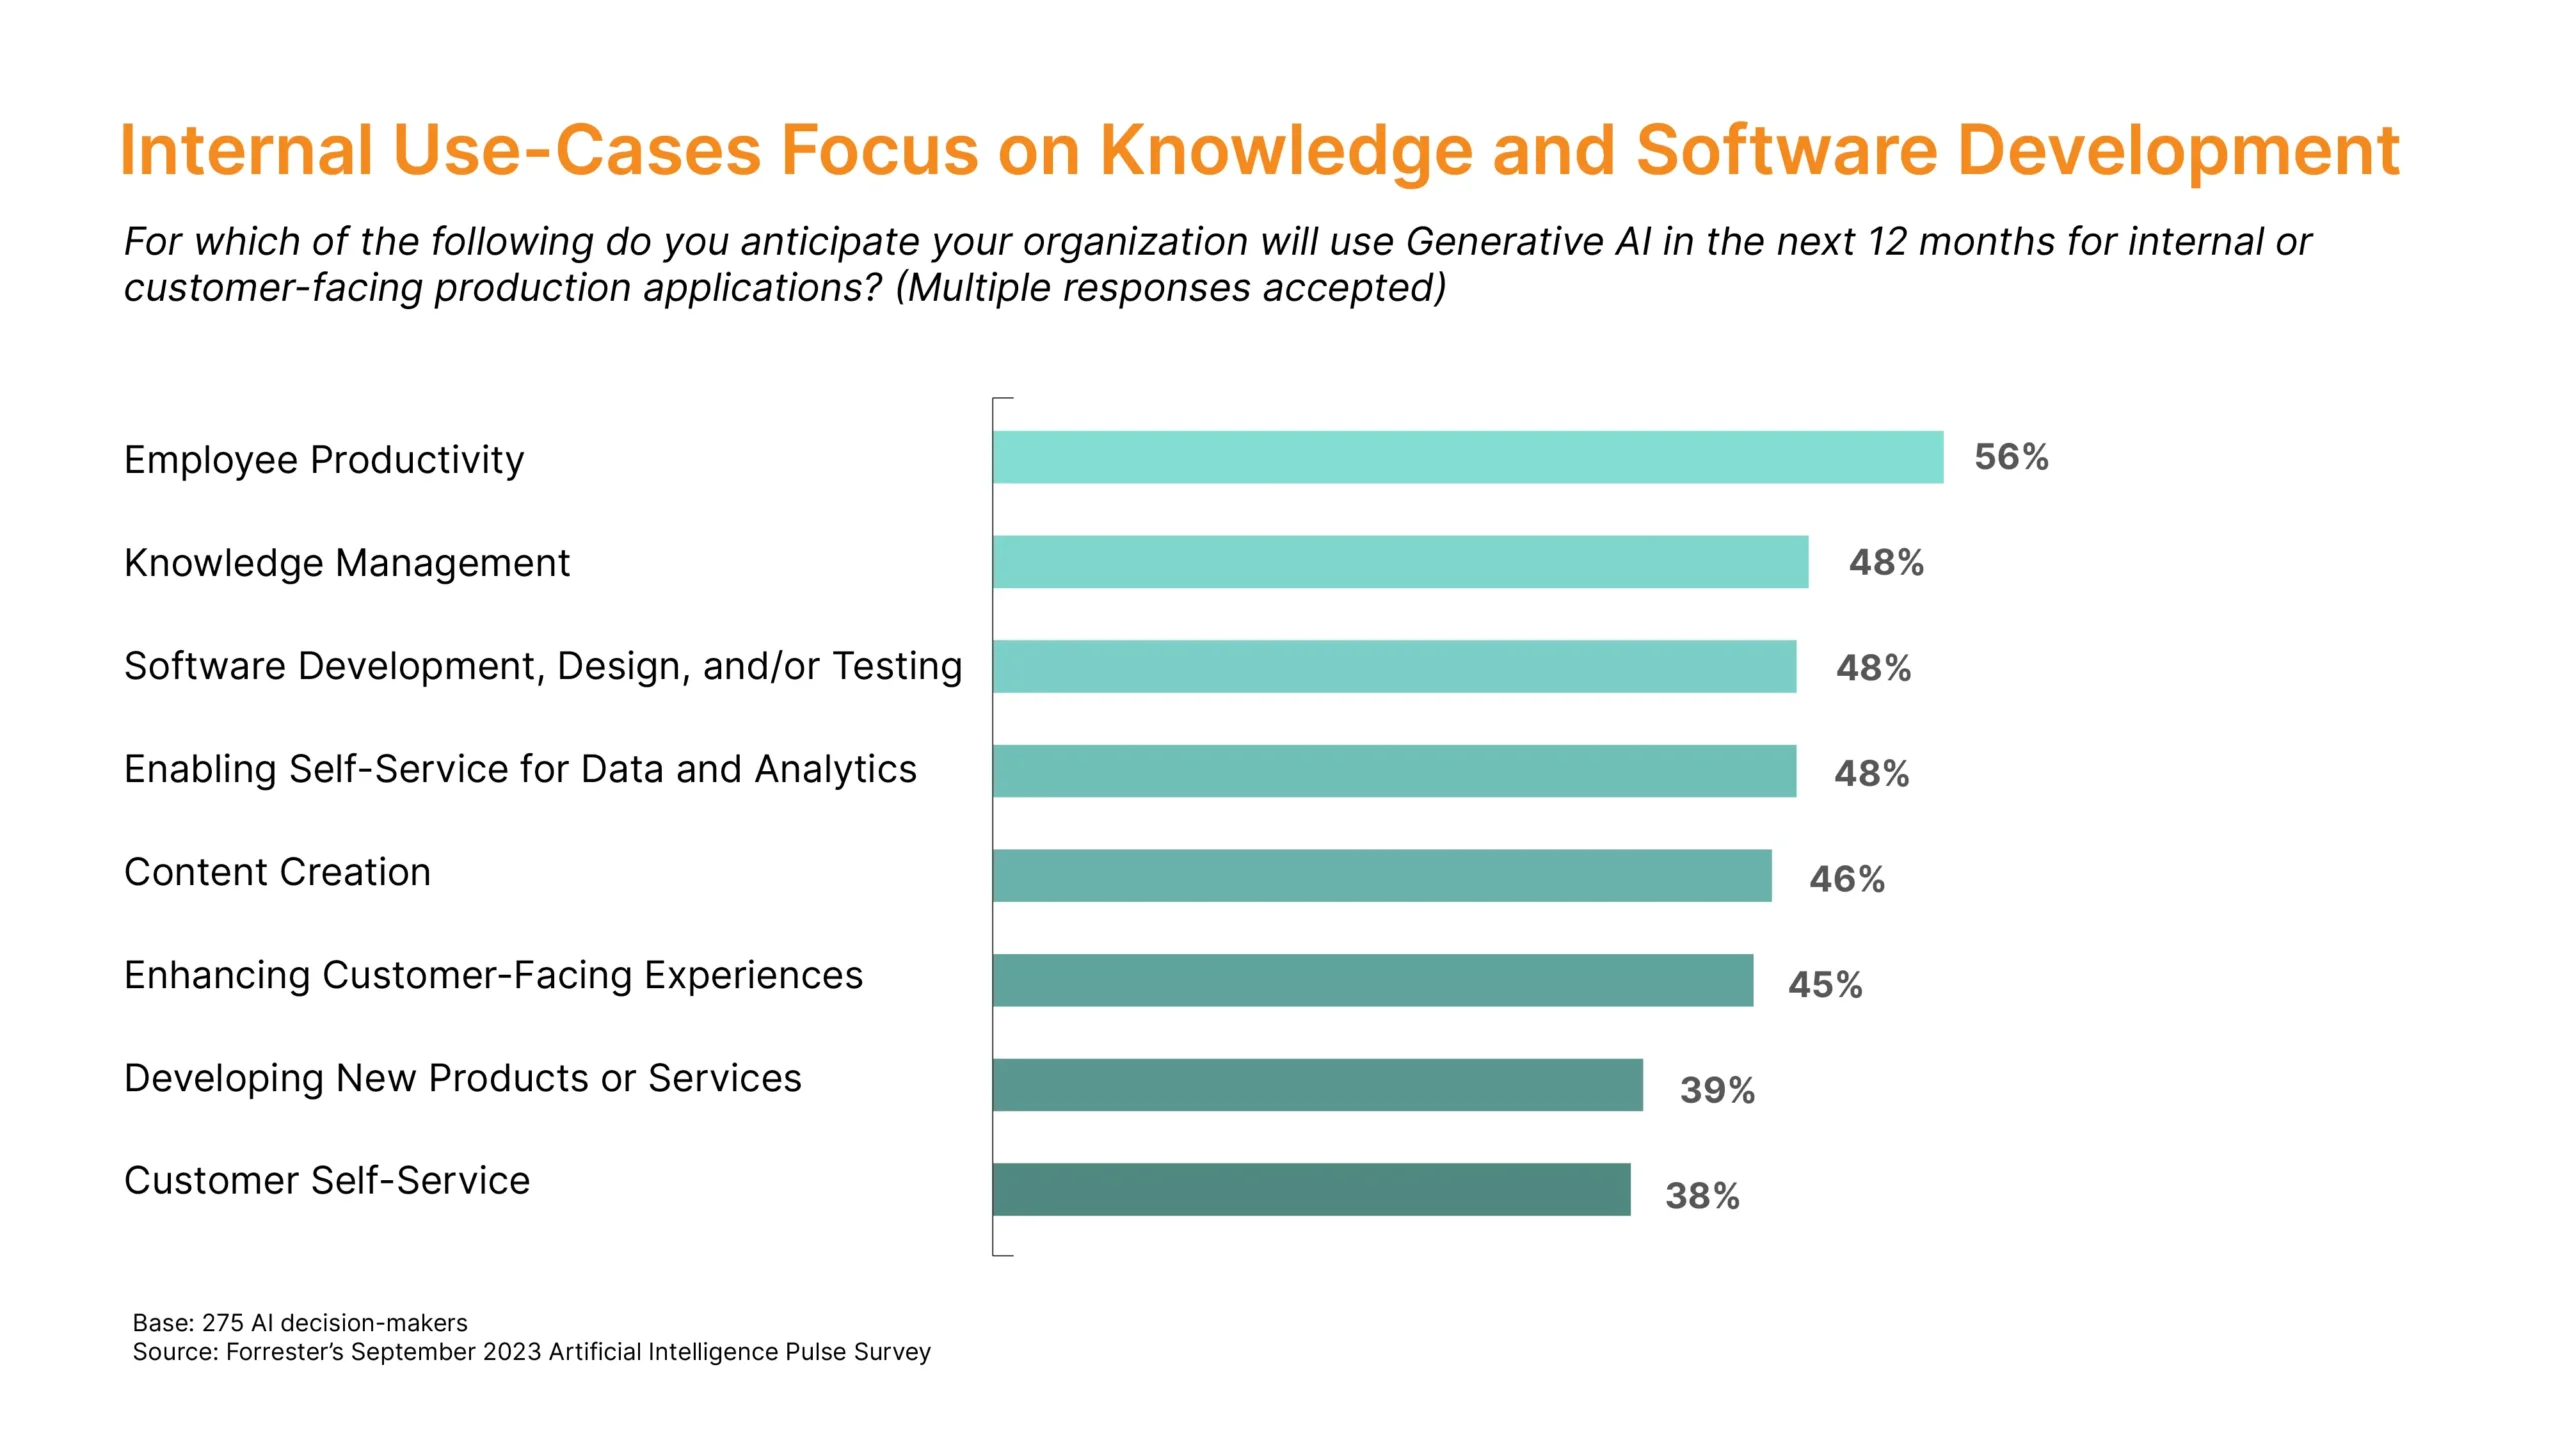 Internal Use-Cases Focus on Knowledge and Software Development